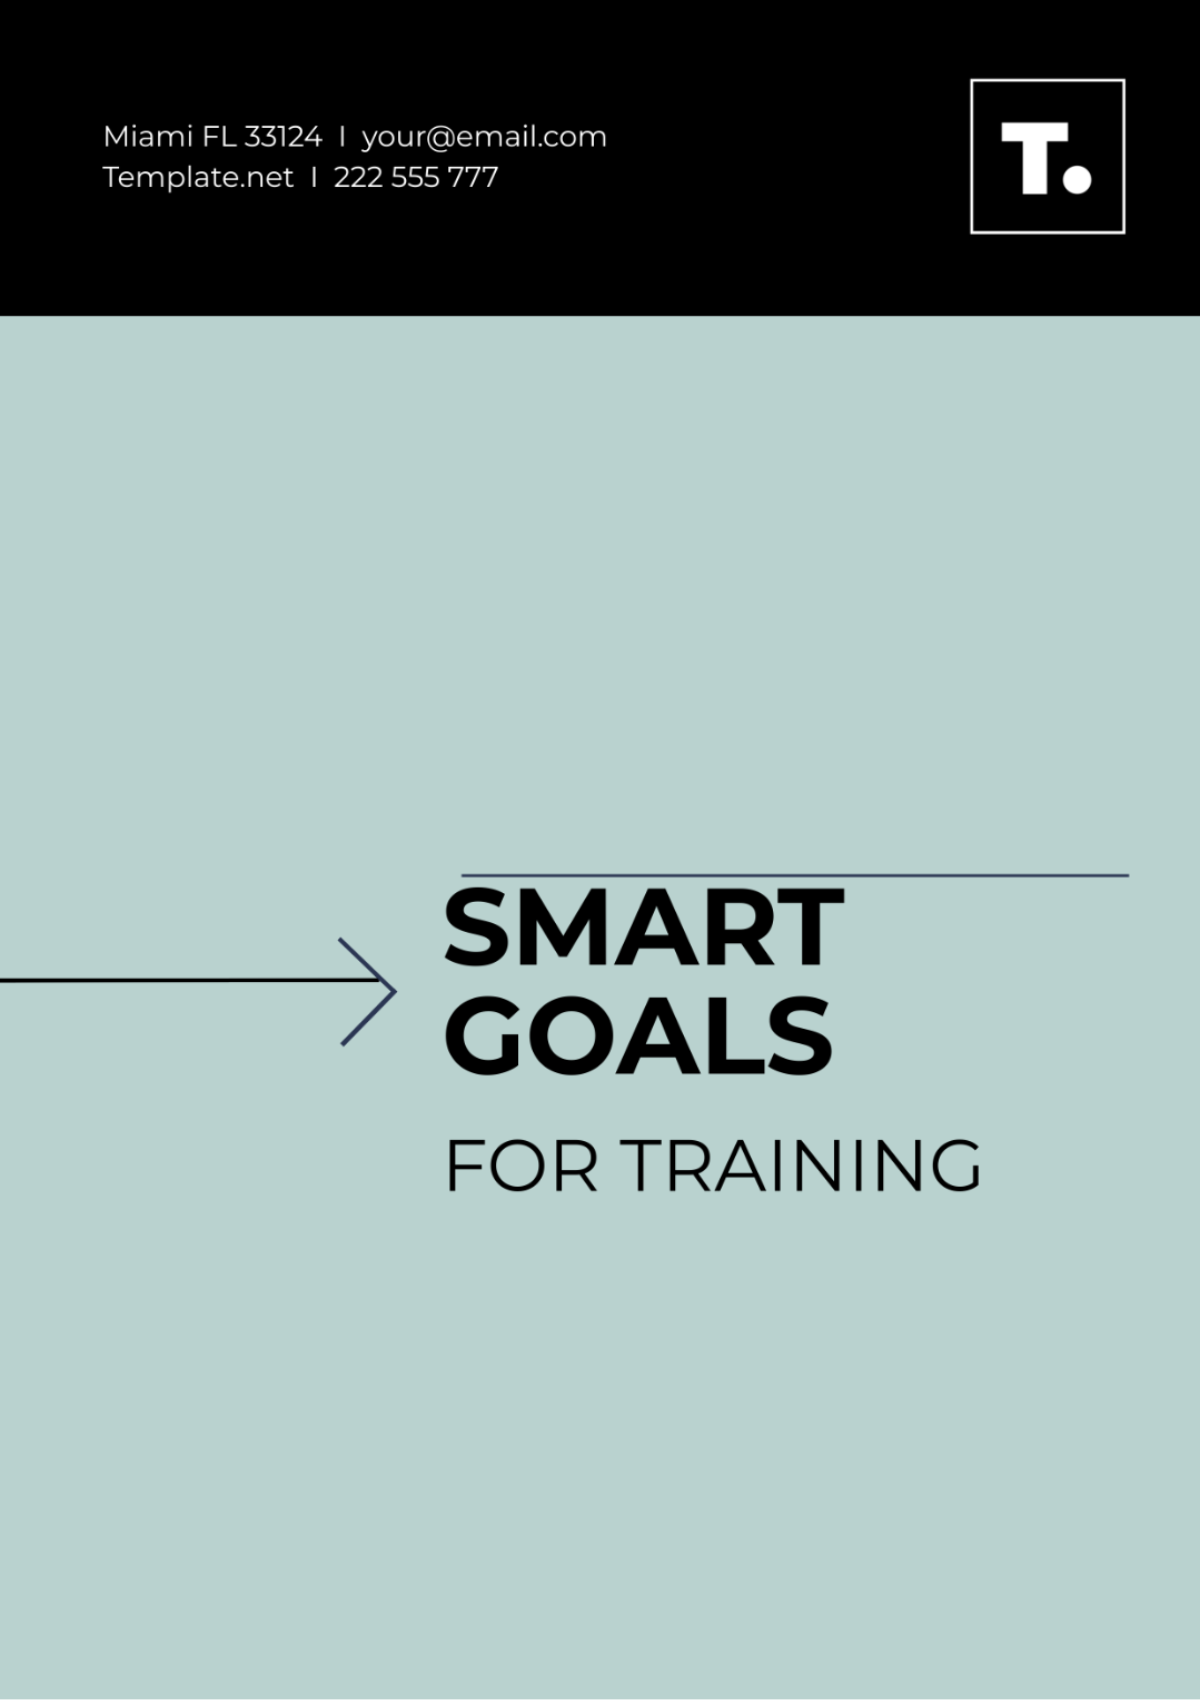 SMART Goals Template for Training